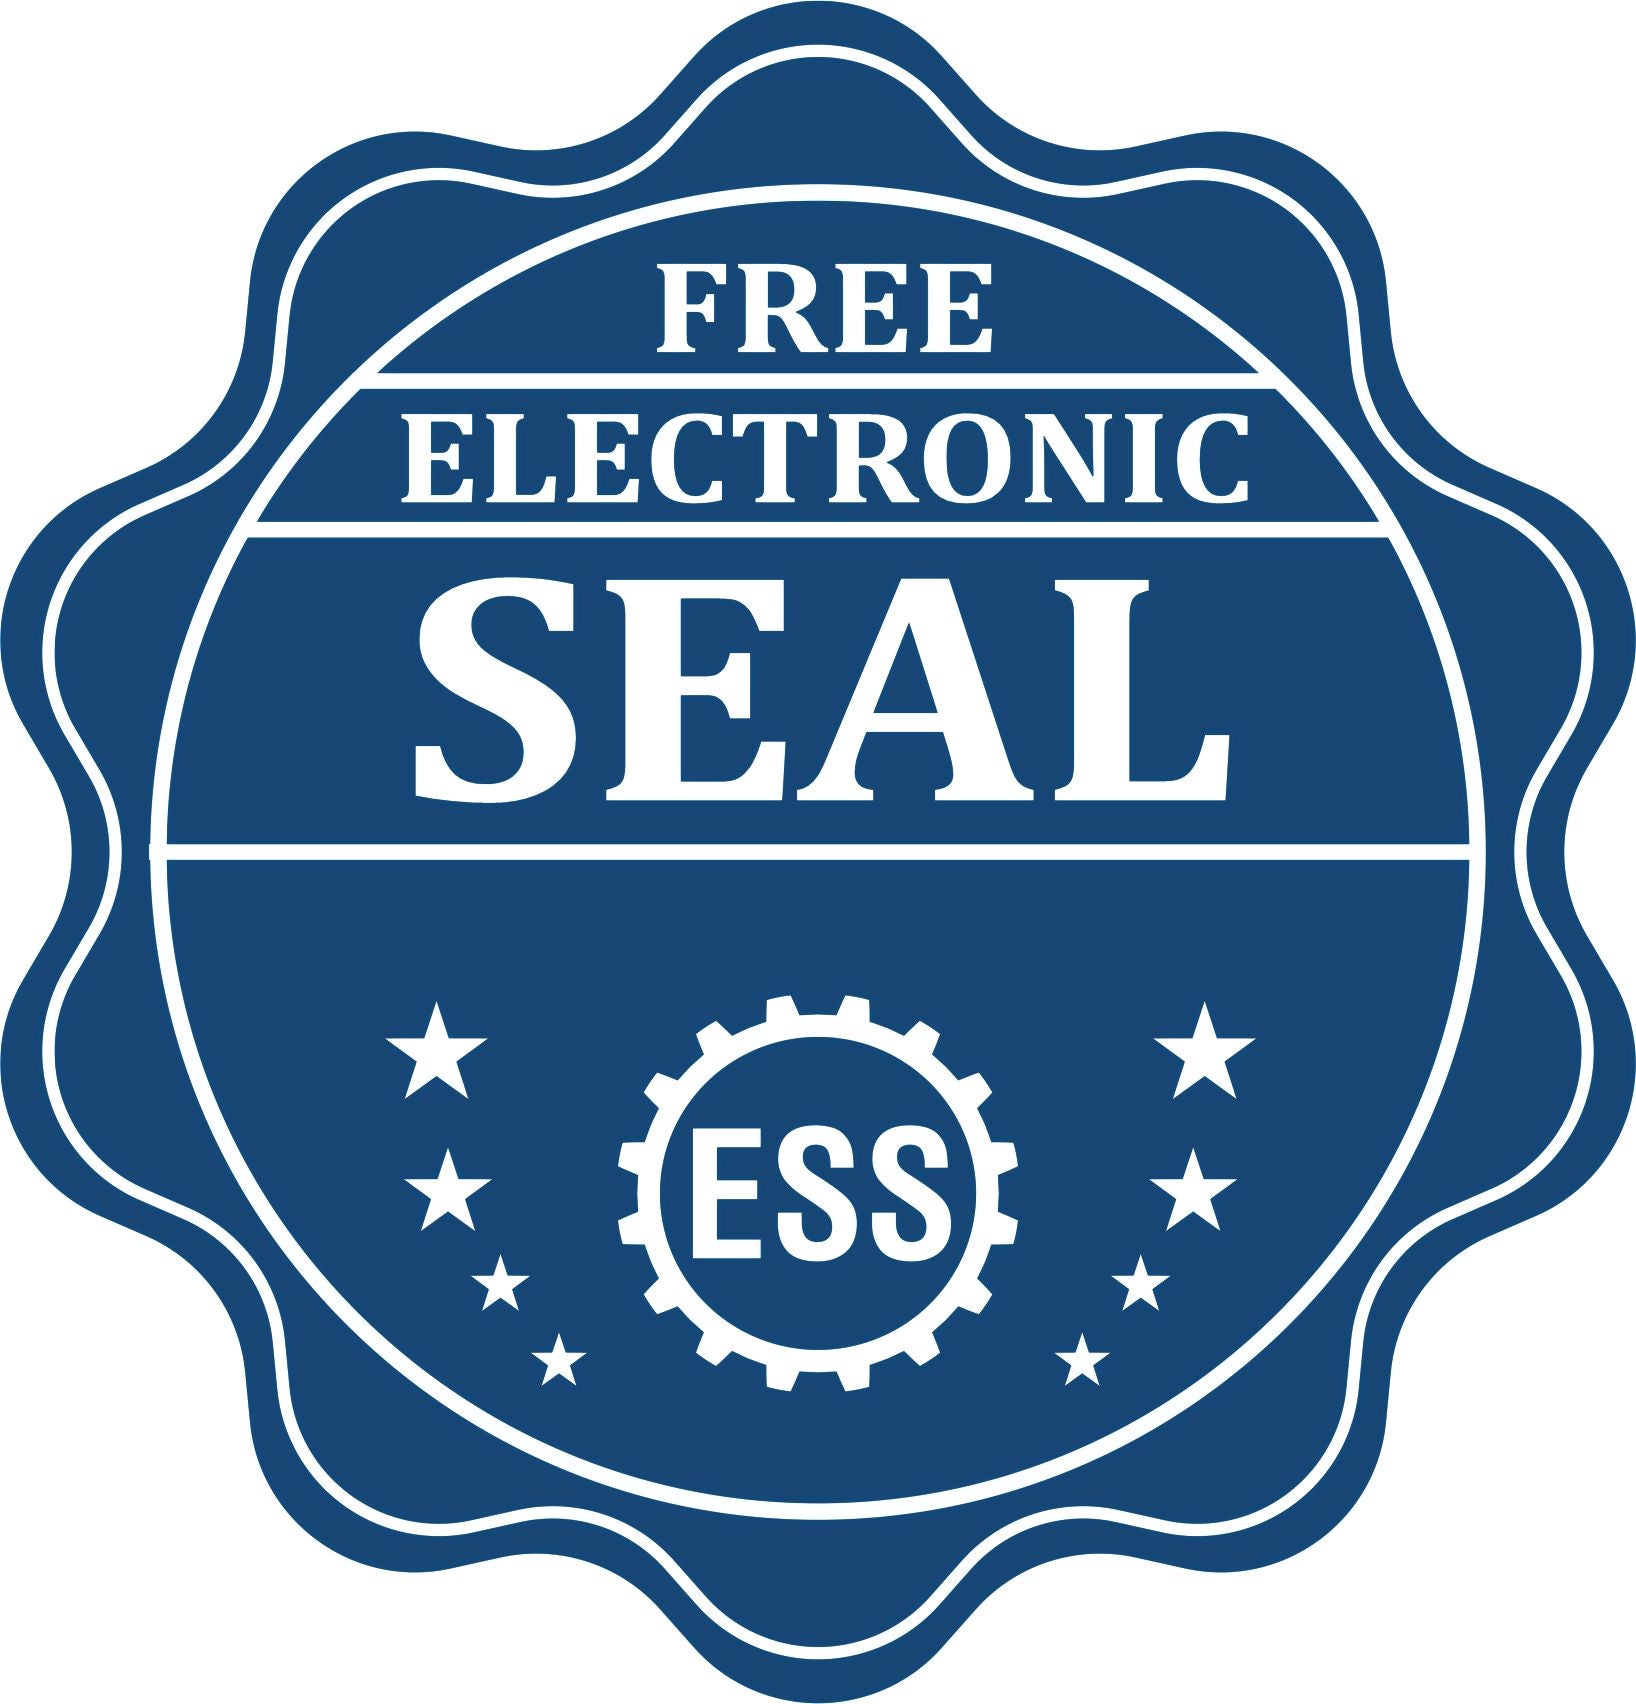 A badge showing a free electronic seal for the Hybrid New York Land Surveyor Seal with stars and the ESS gear on the emblem.